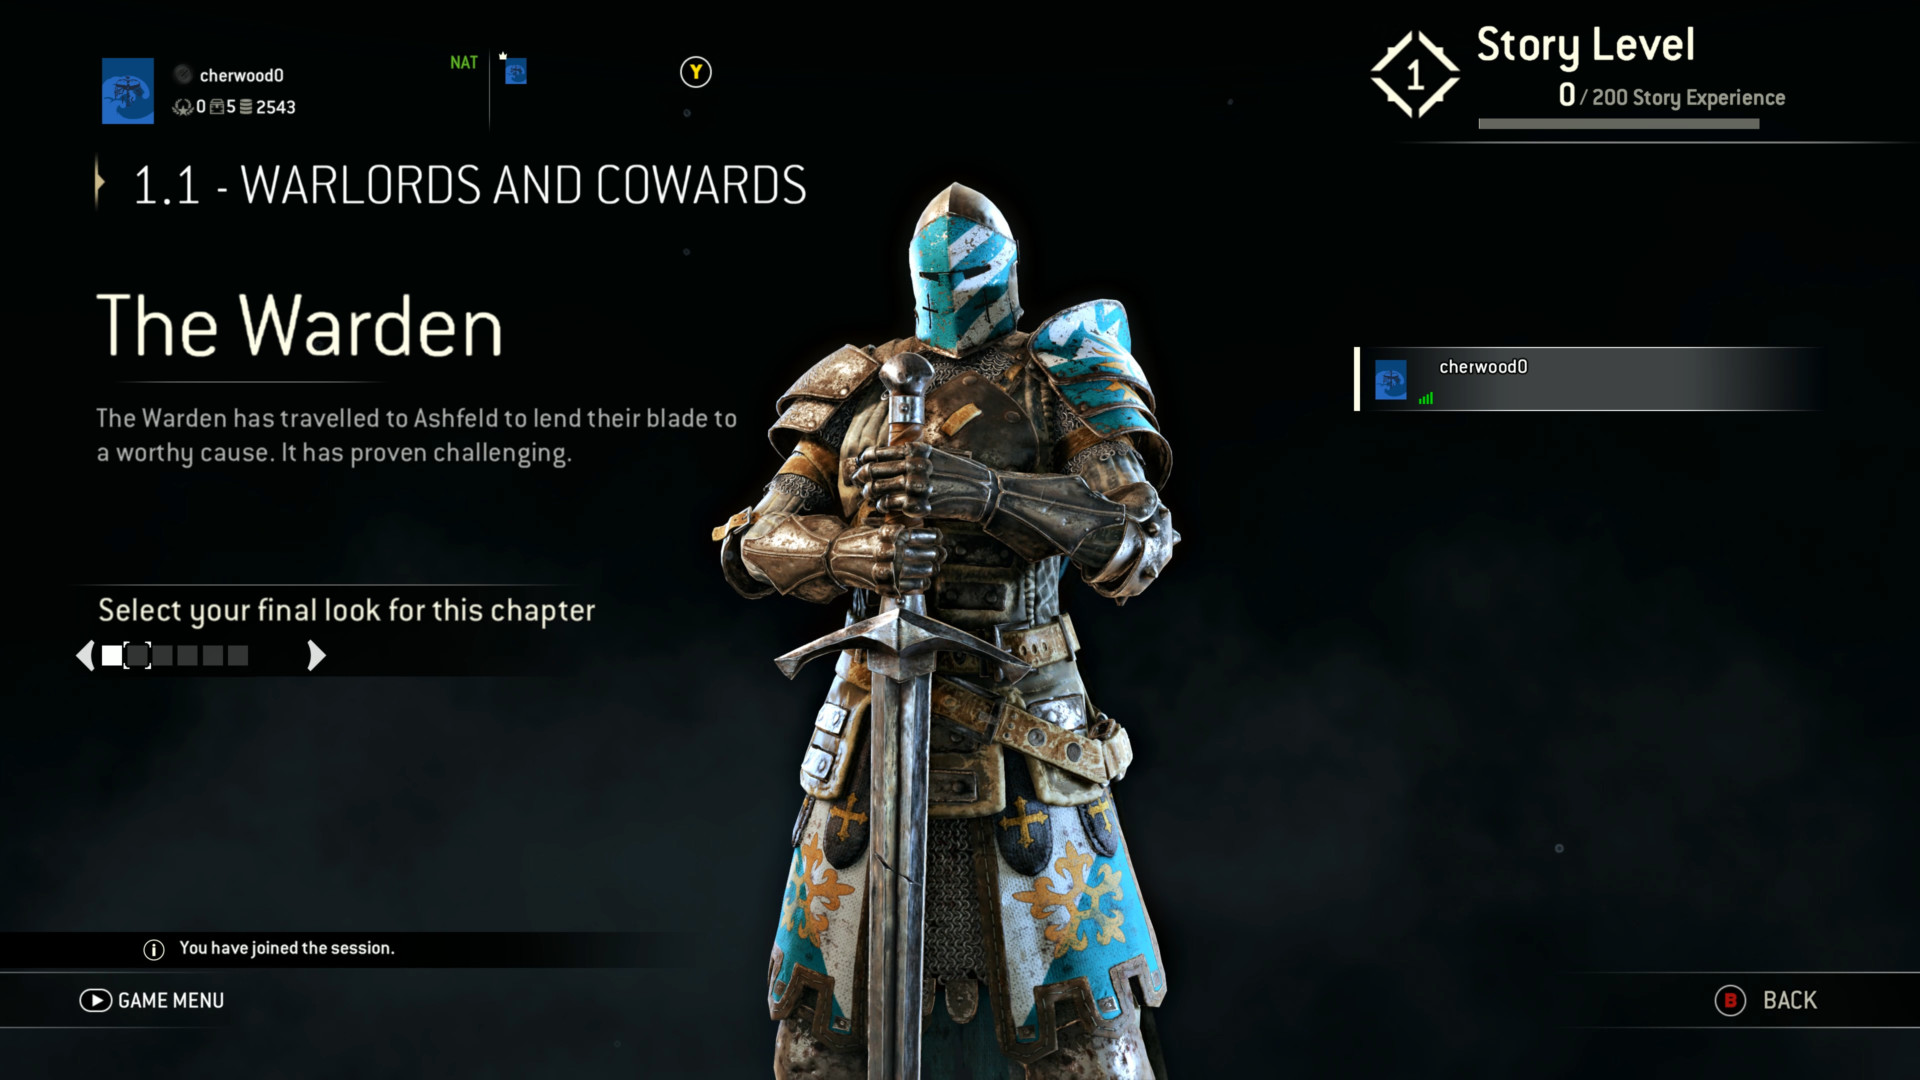 Screenshot from For Honor showing an introduction to a character known as The Warden